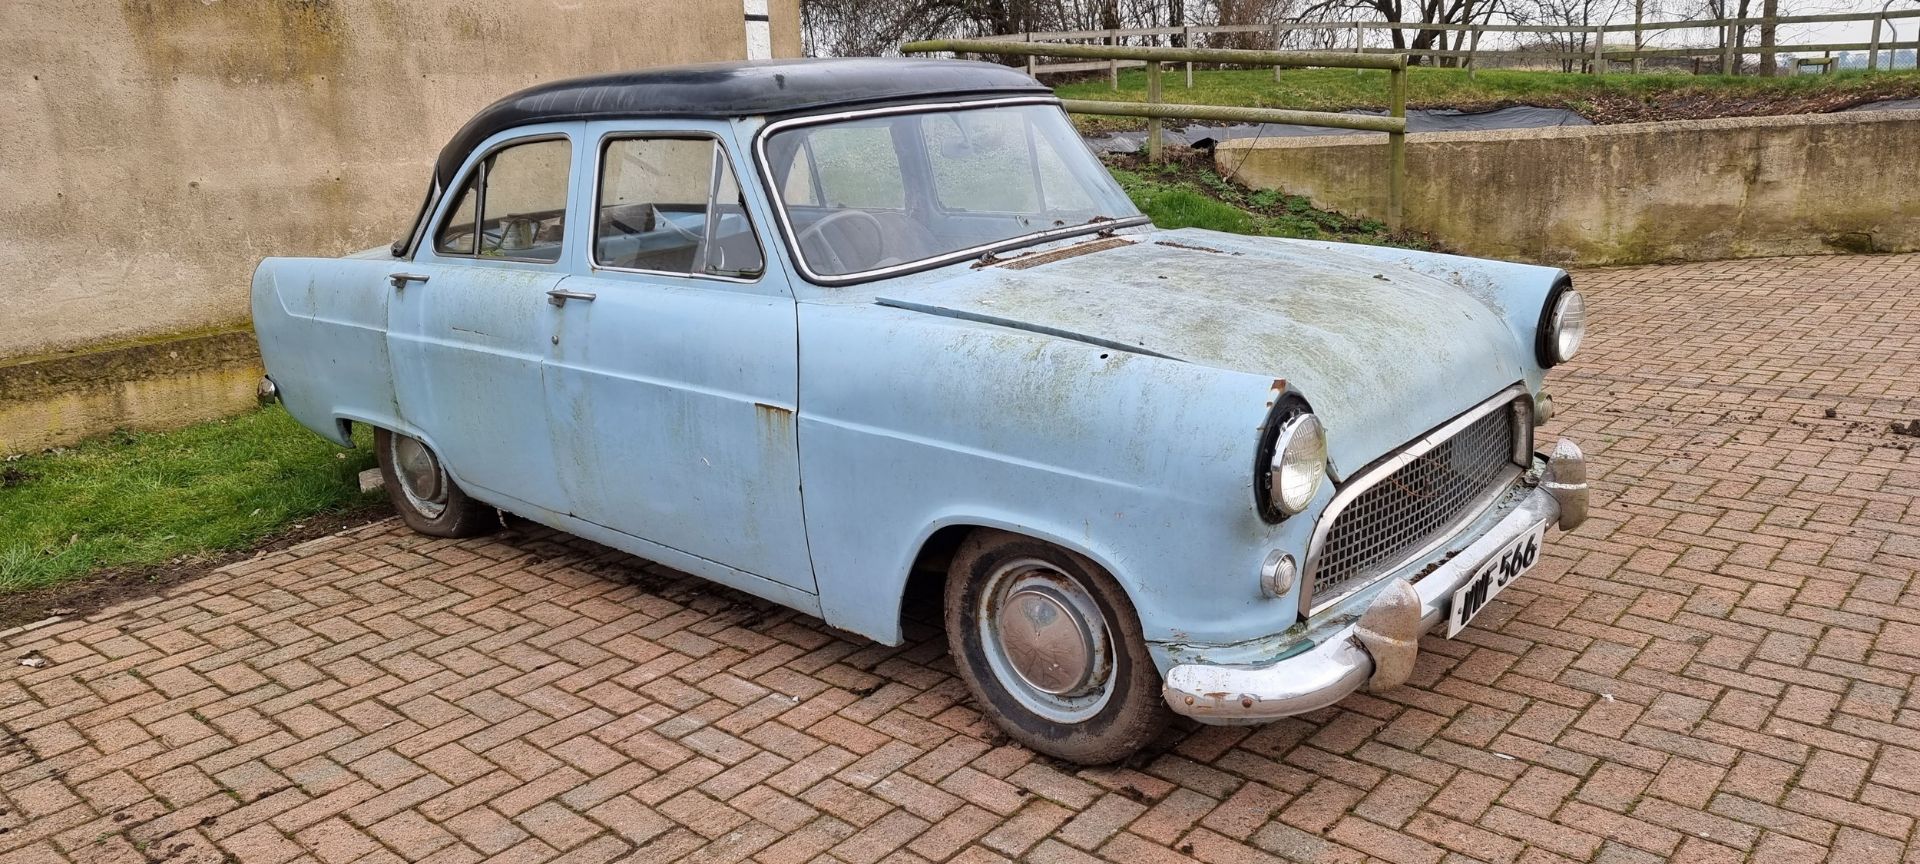 1959 Ford Consul MkII, Lowline 1,703cc. Registration number WWF 566 (see text). Chassis number